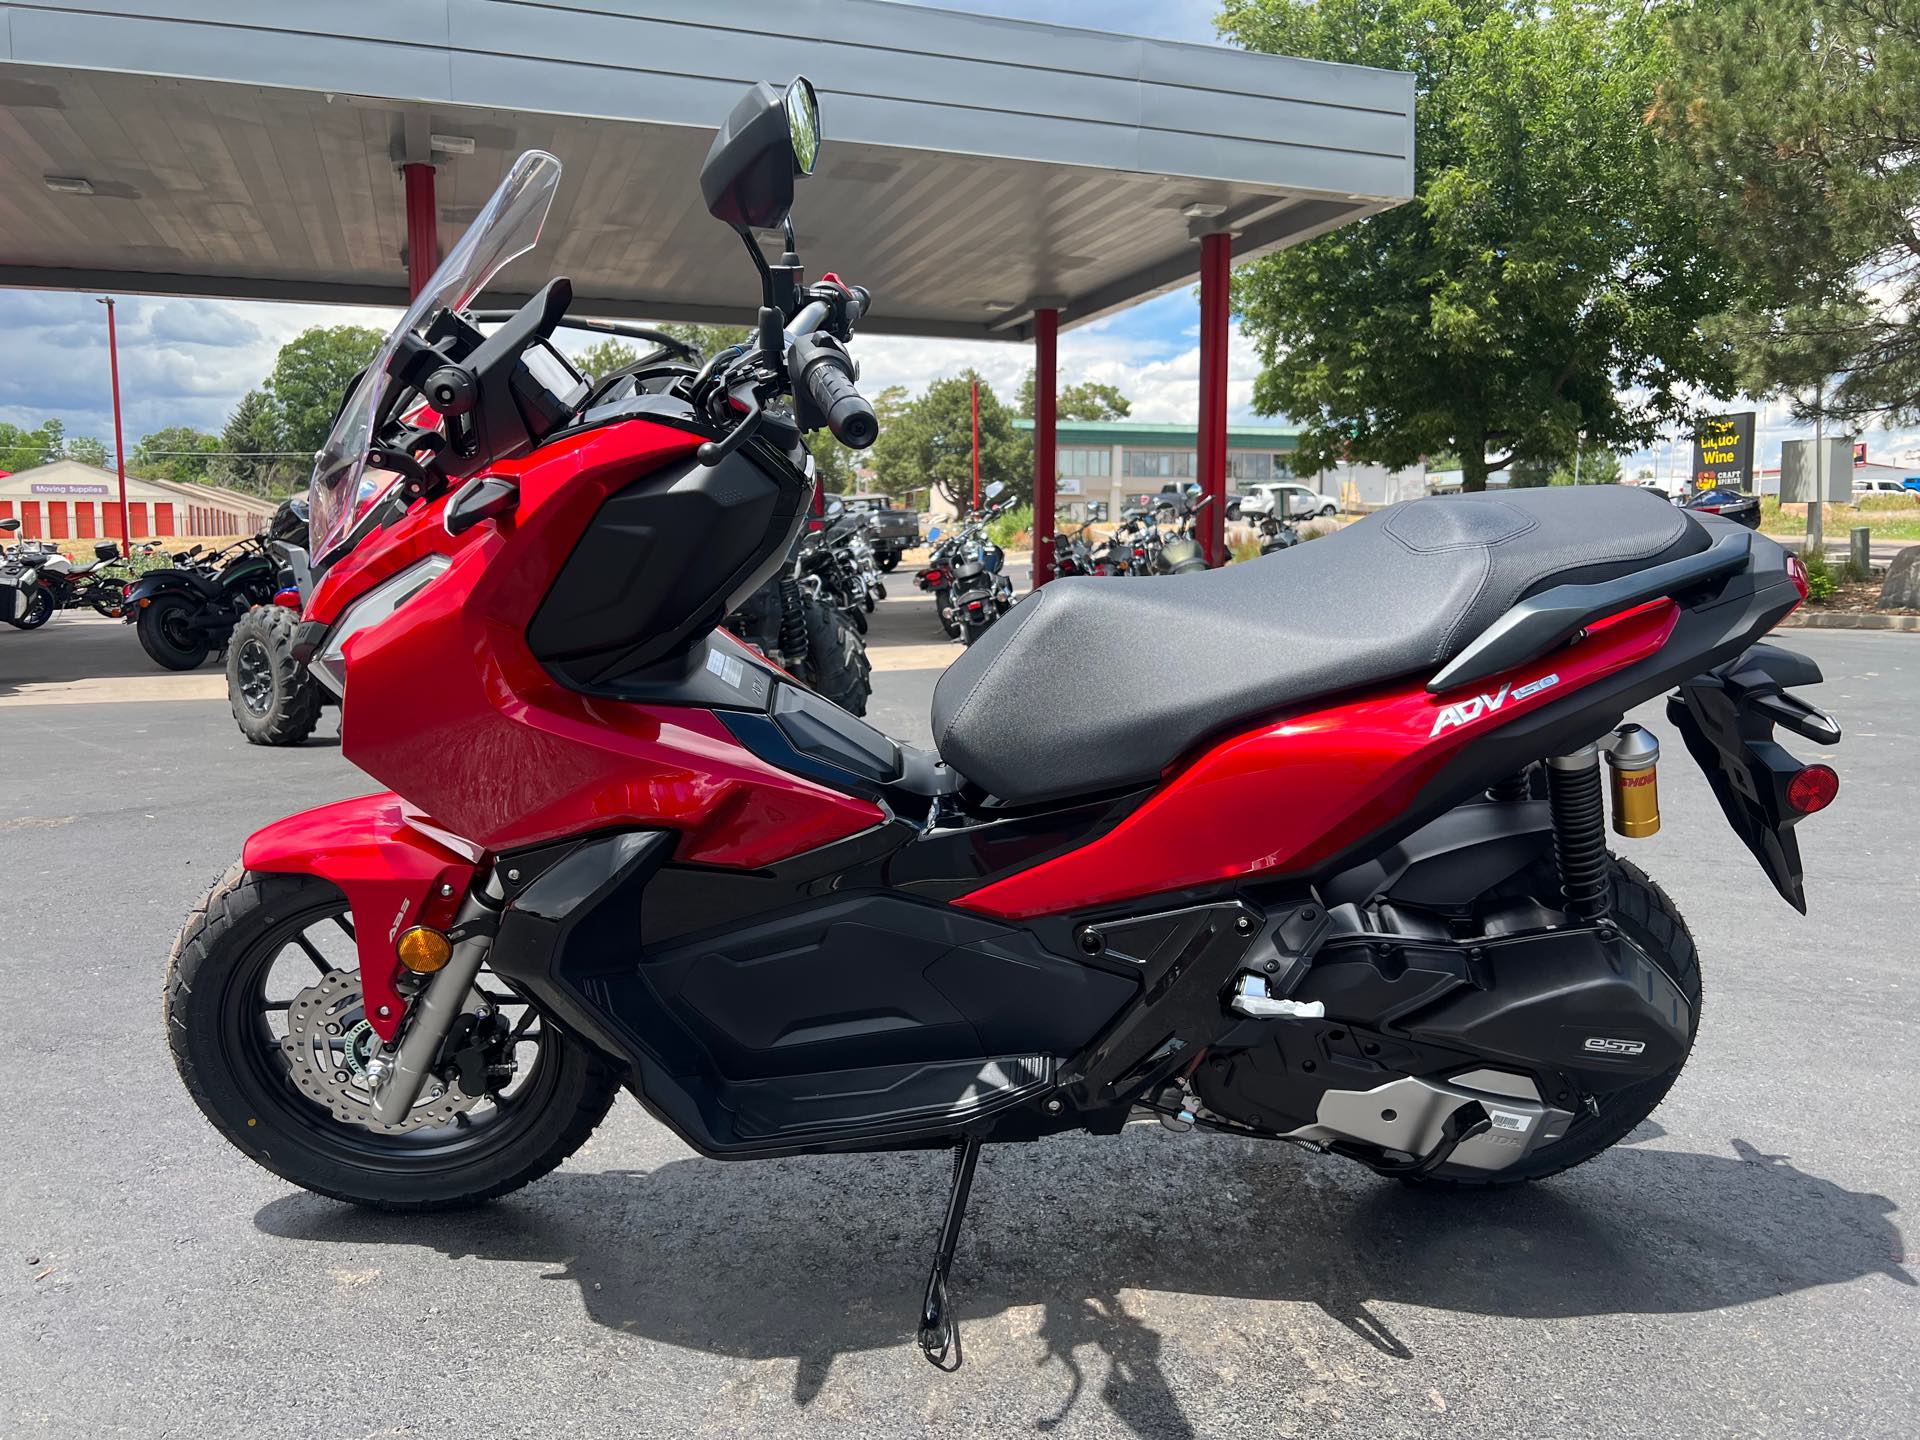 2022 Honda ADV 150 at Aces Motorcycles - Fort Collins